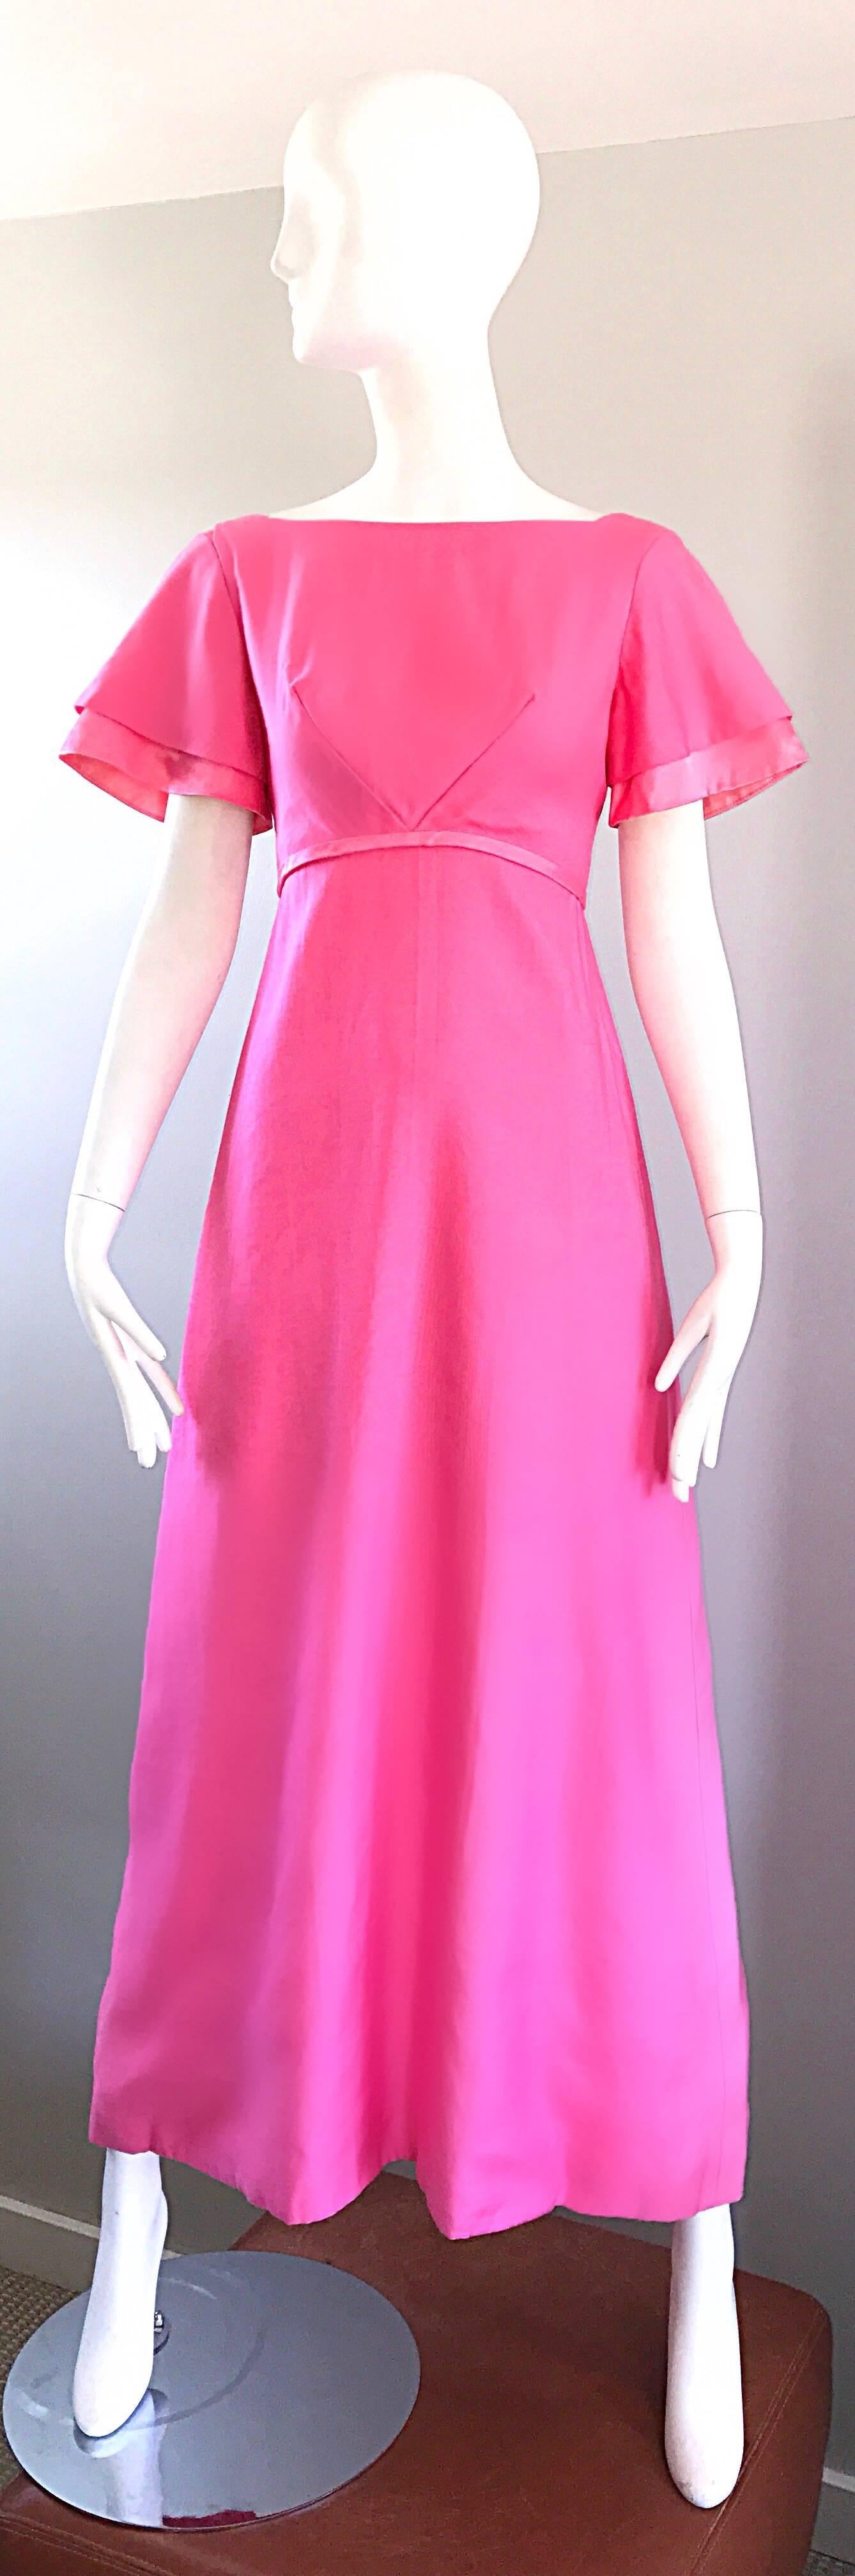 Amazing 1970s EMMBA DOMB bubblegum pink short sleeve cotton empire waist maxi dress! Vibrant pink color looks great on any skin tone. Fitted bodice with a full skirt. Chic bell sleeves, and an attached bow at center back. Full metal zipper up the